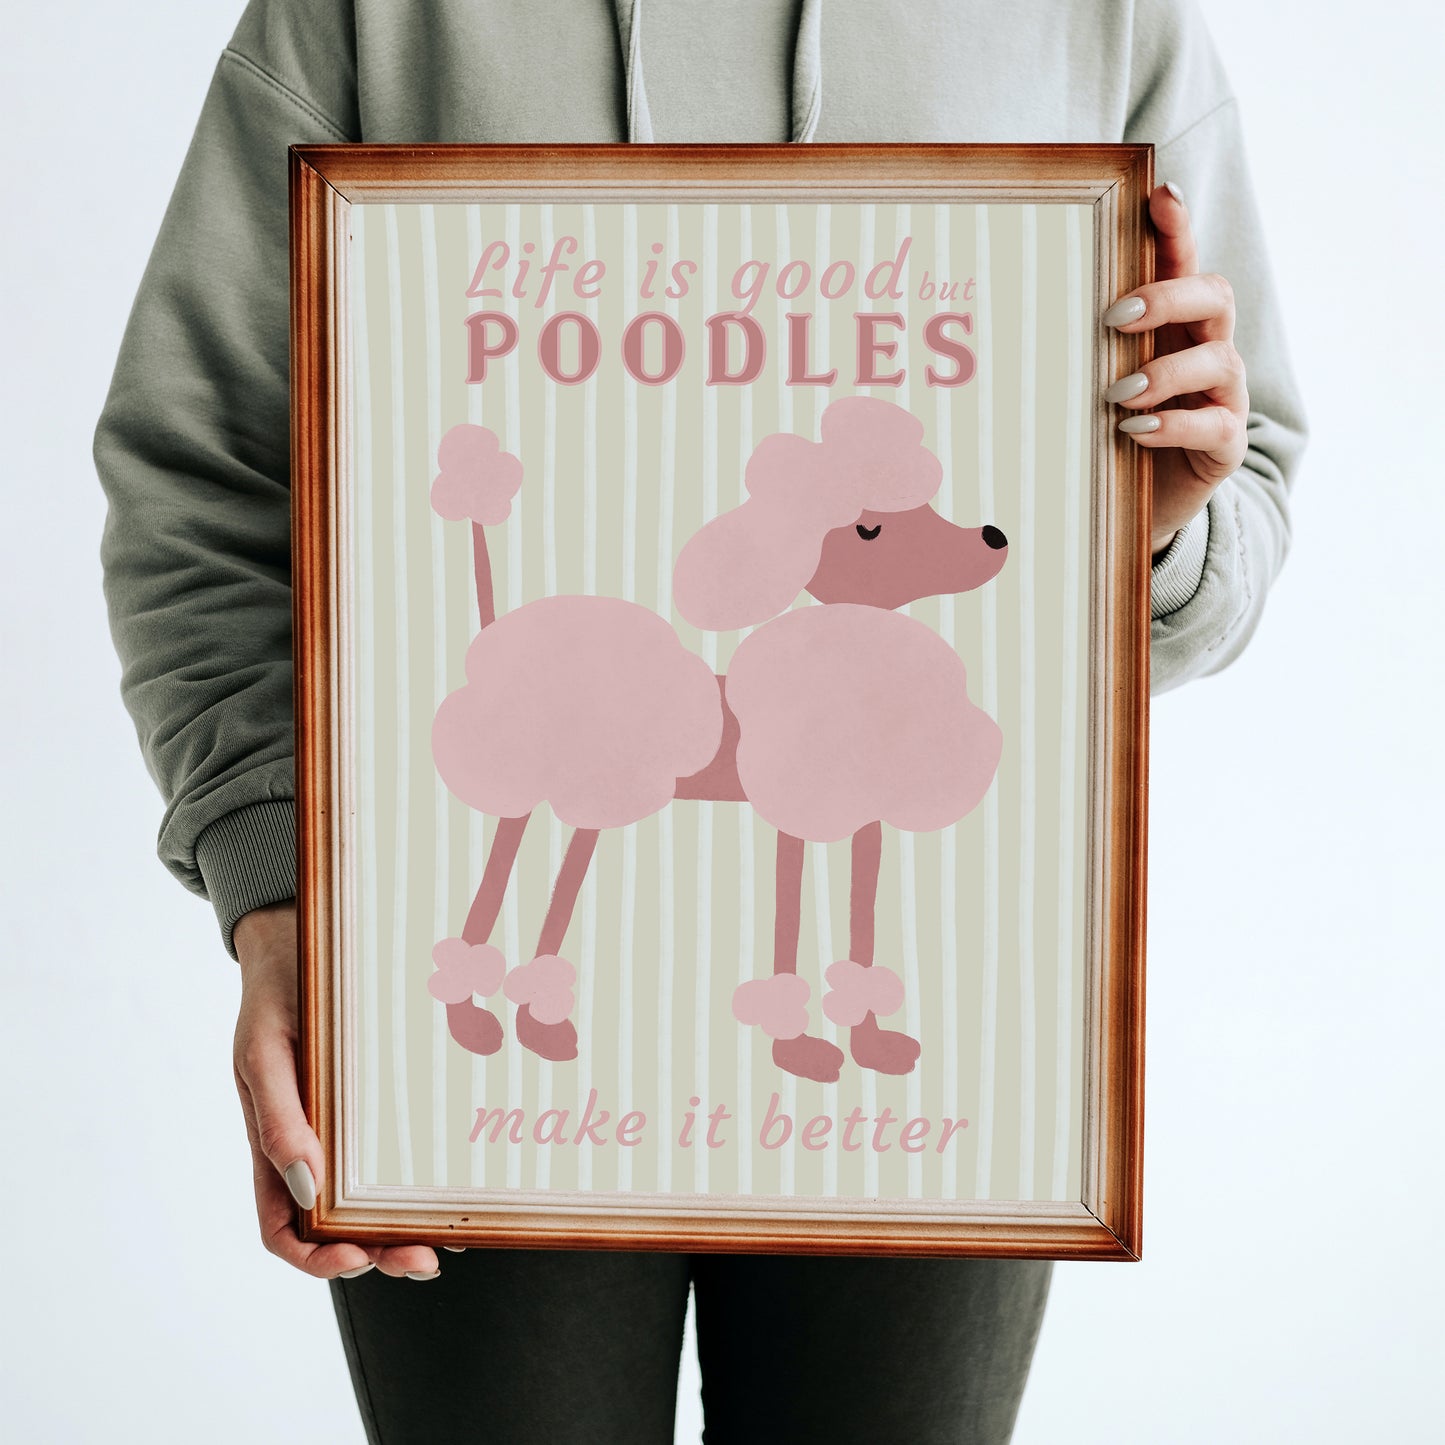 Poodle Dogs Retro Pink Funny Poster